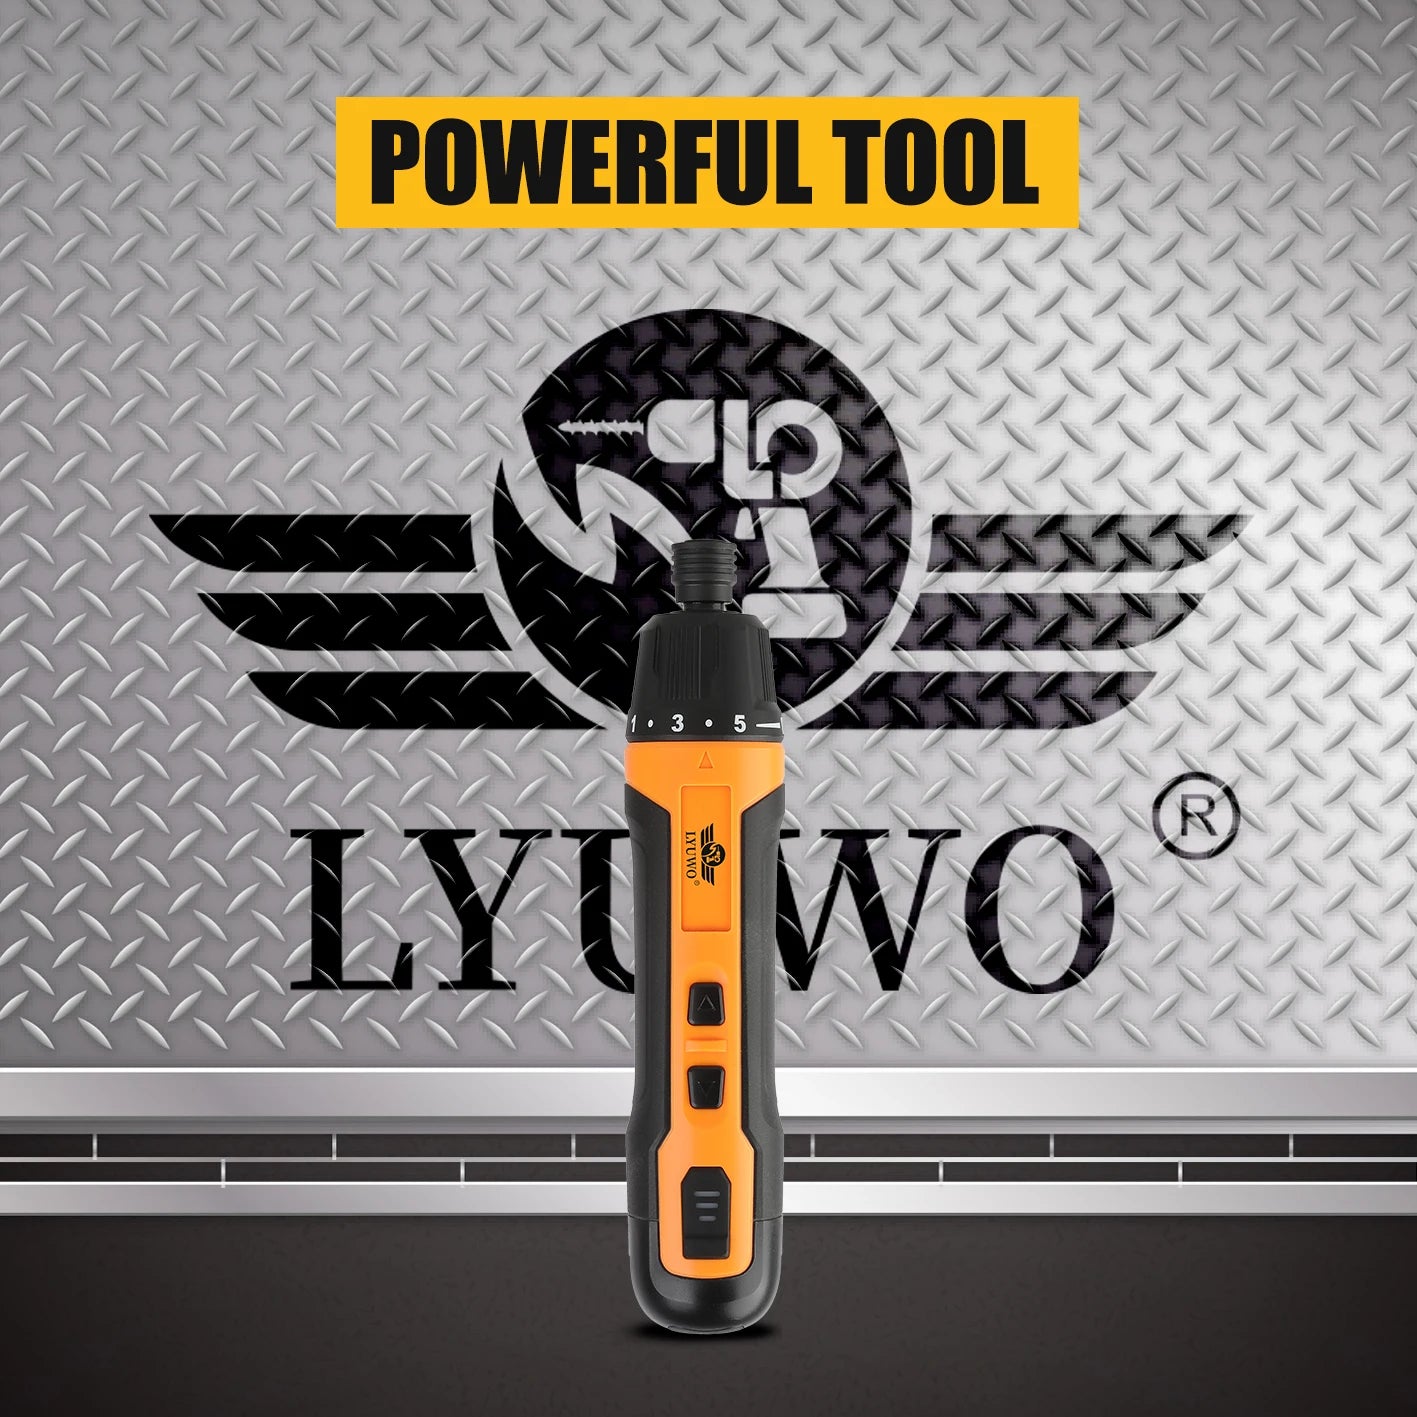 LYUWO Mini Wireless Electric Screwdriver, Rechargeable 1300mah Power Drill Bit, Multifunctional Disassembly Torque Repair Tool